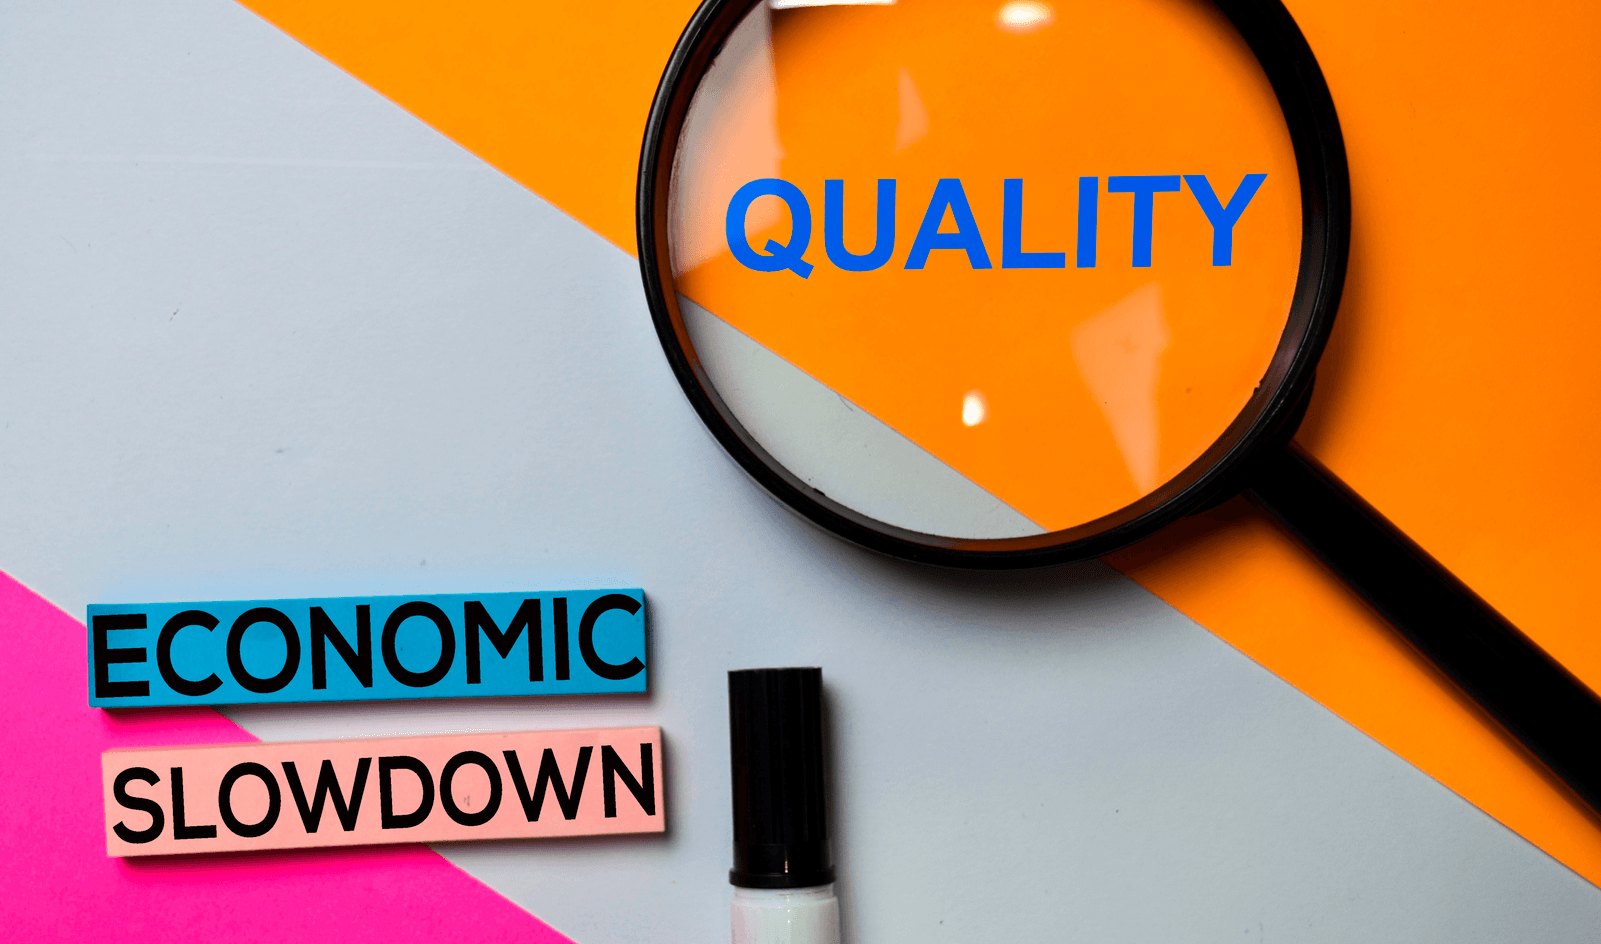 Why Manufacturers Should Focus on Quality During Tough Economic Times